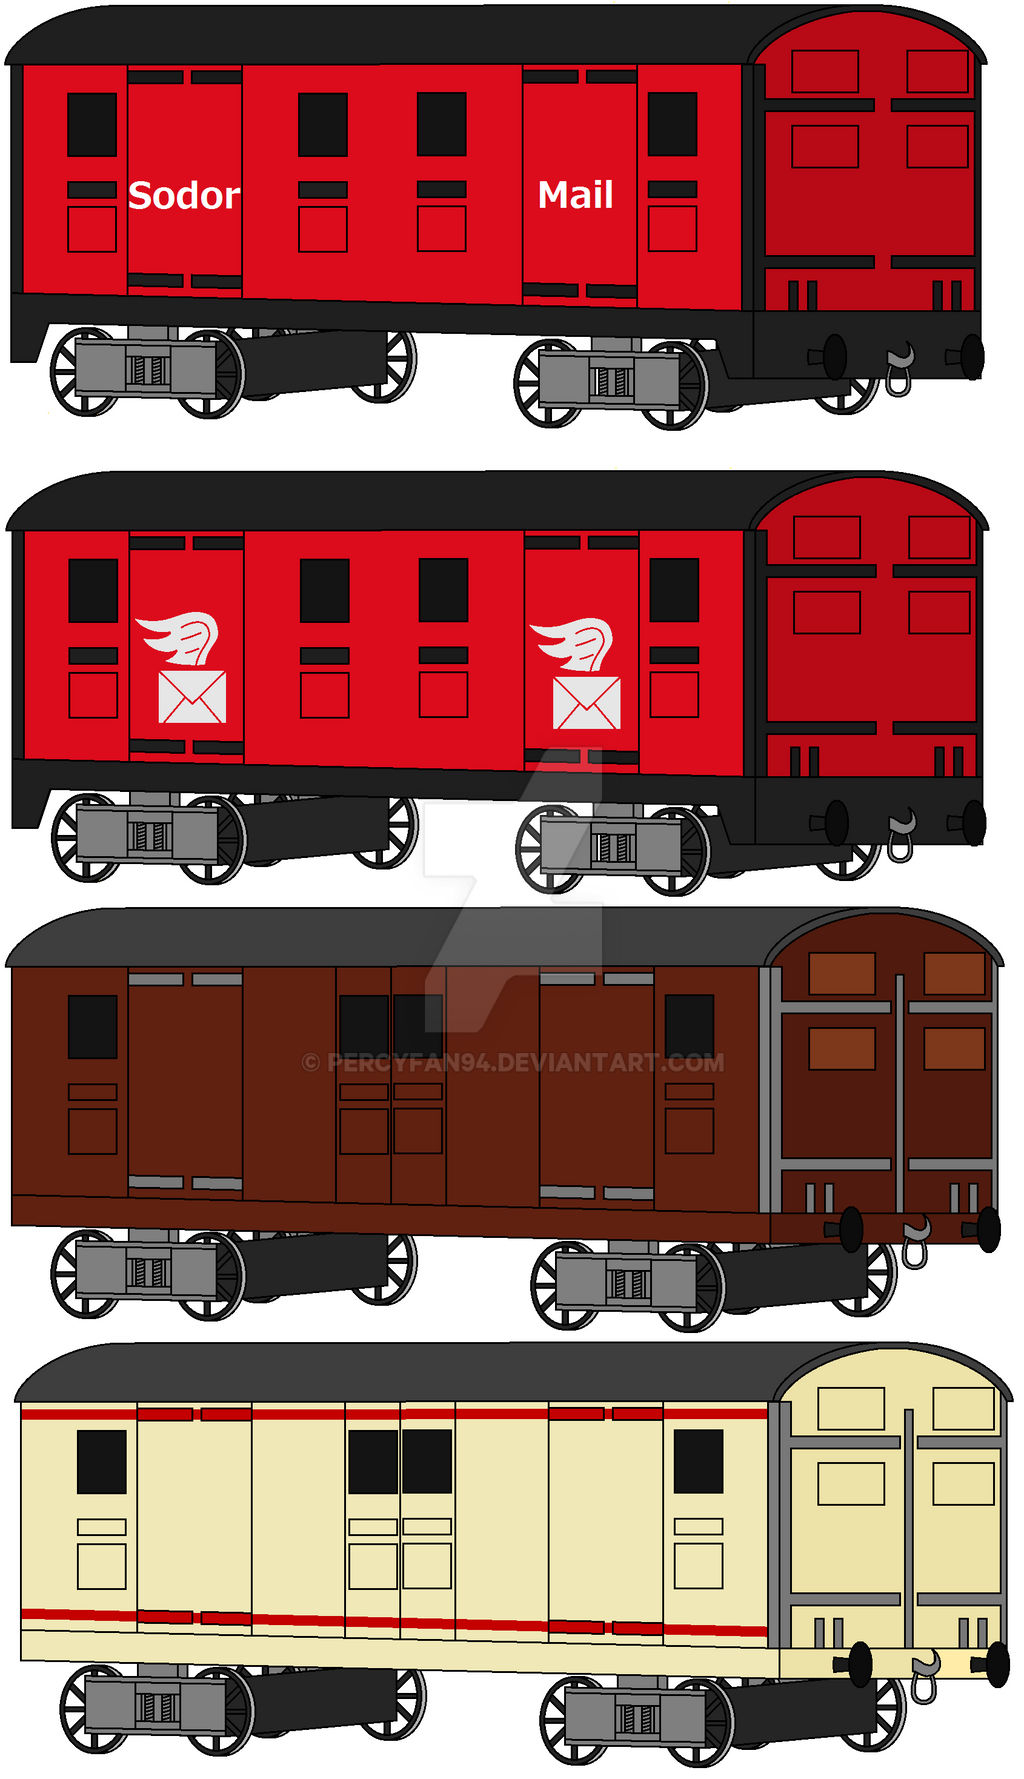 TTTE - Mail and Utility Cars